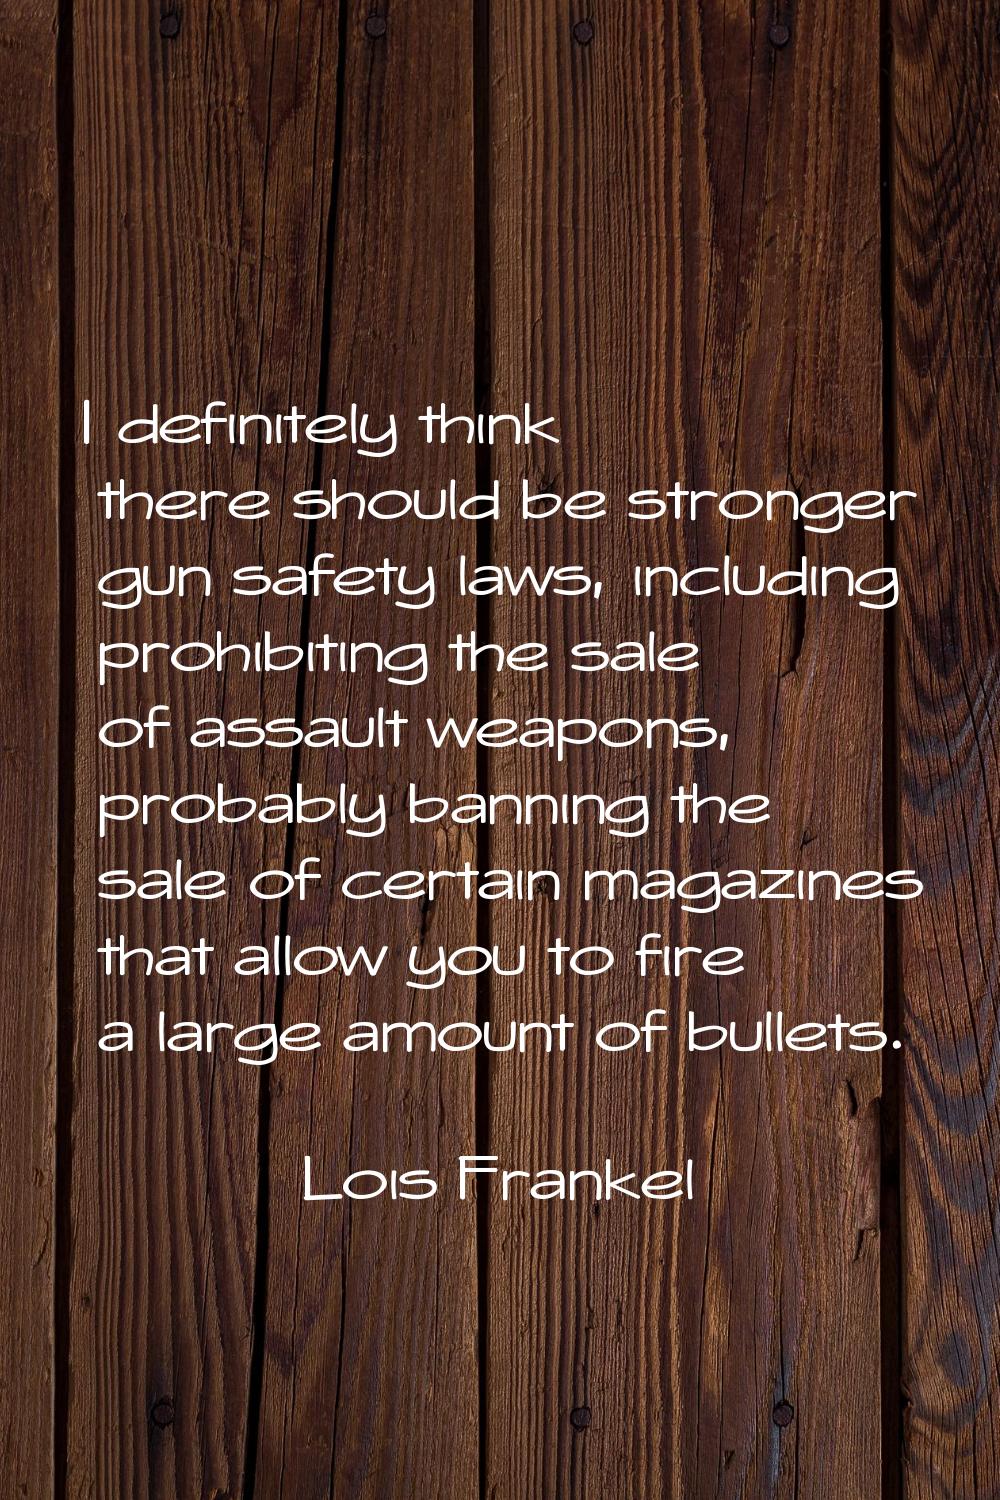 I definitely think there should be stronger gun safety laws, including prohibiting the sale of assa